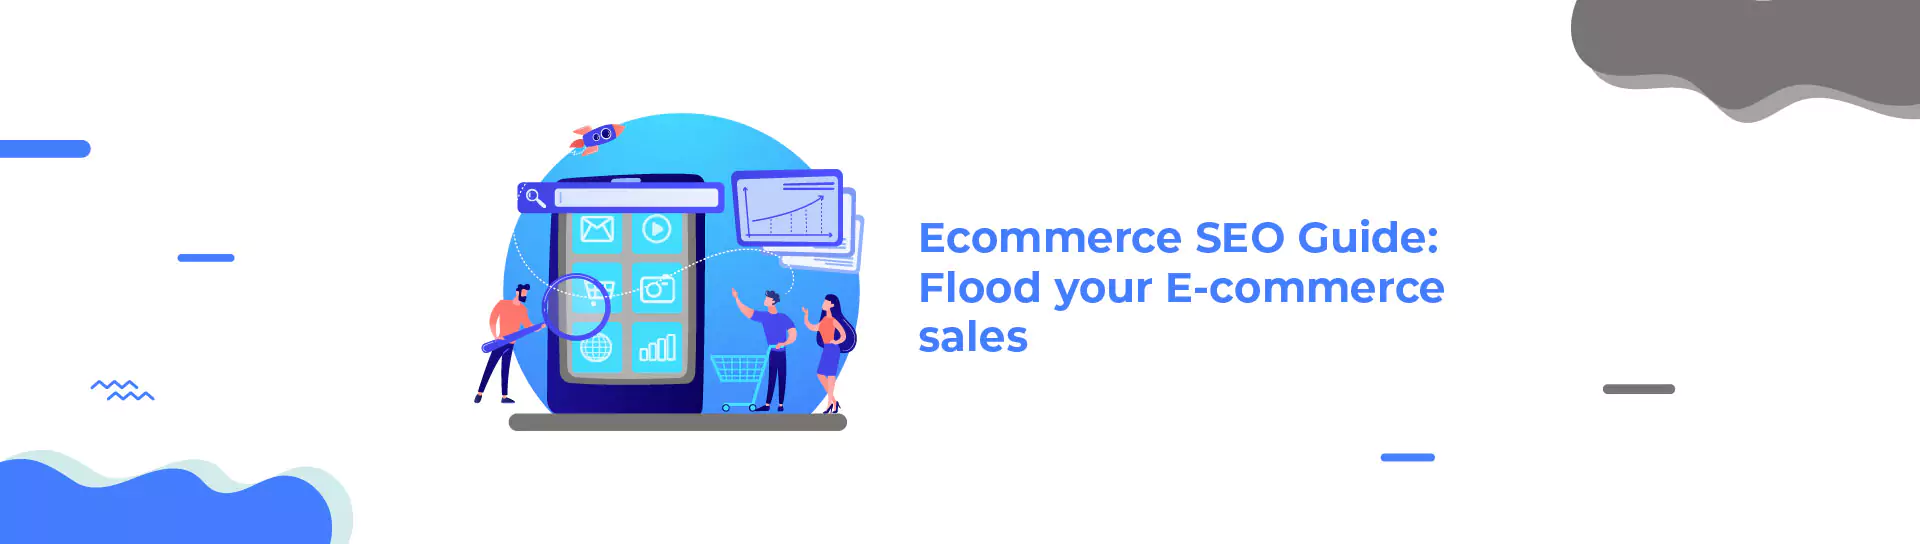 Ecommerce SEO Guide: Flood Your Ecommerce Sales